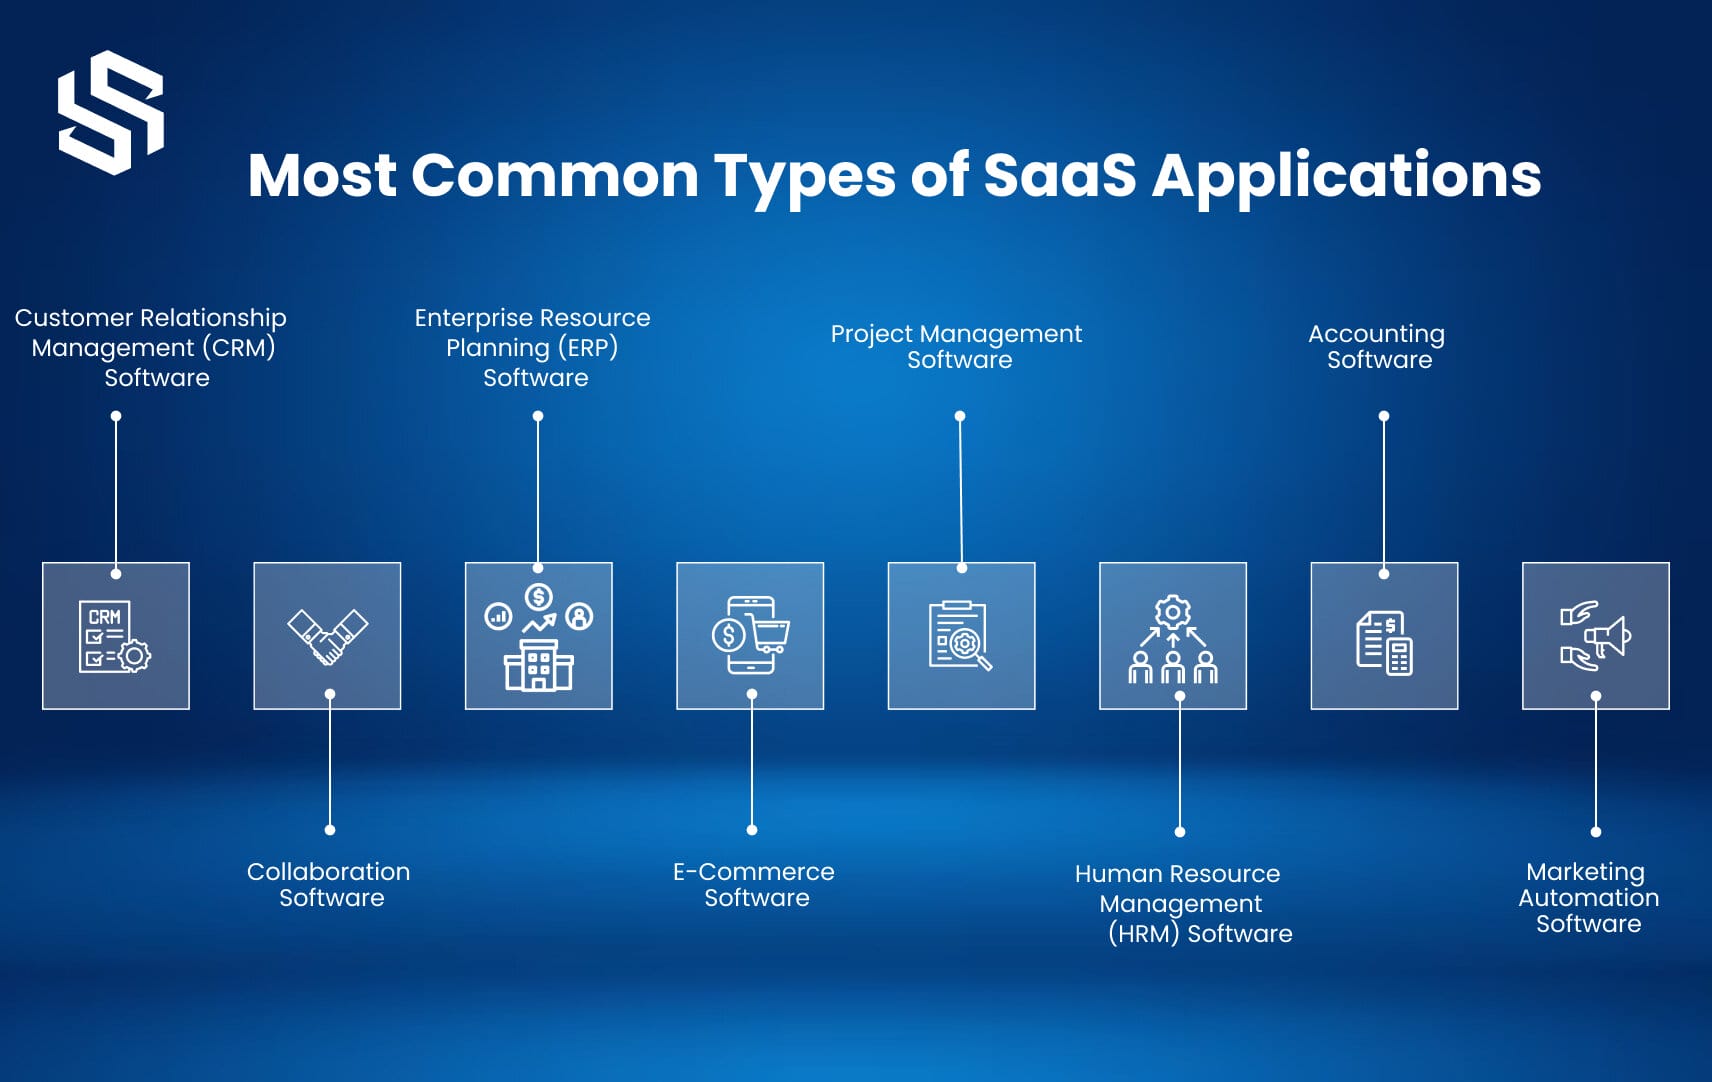 Most Common Types of SaaS Applications